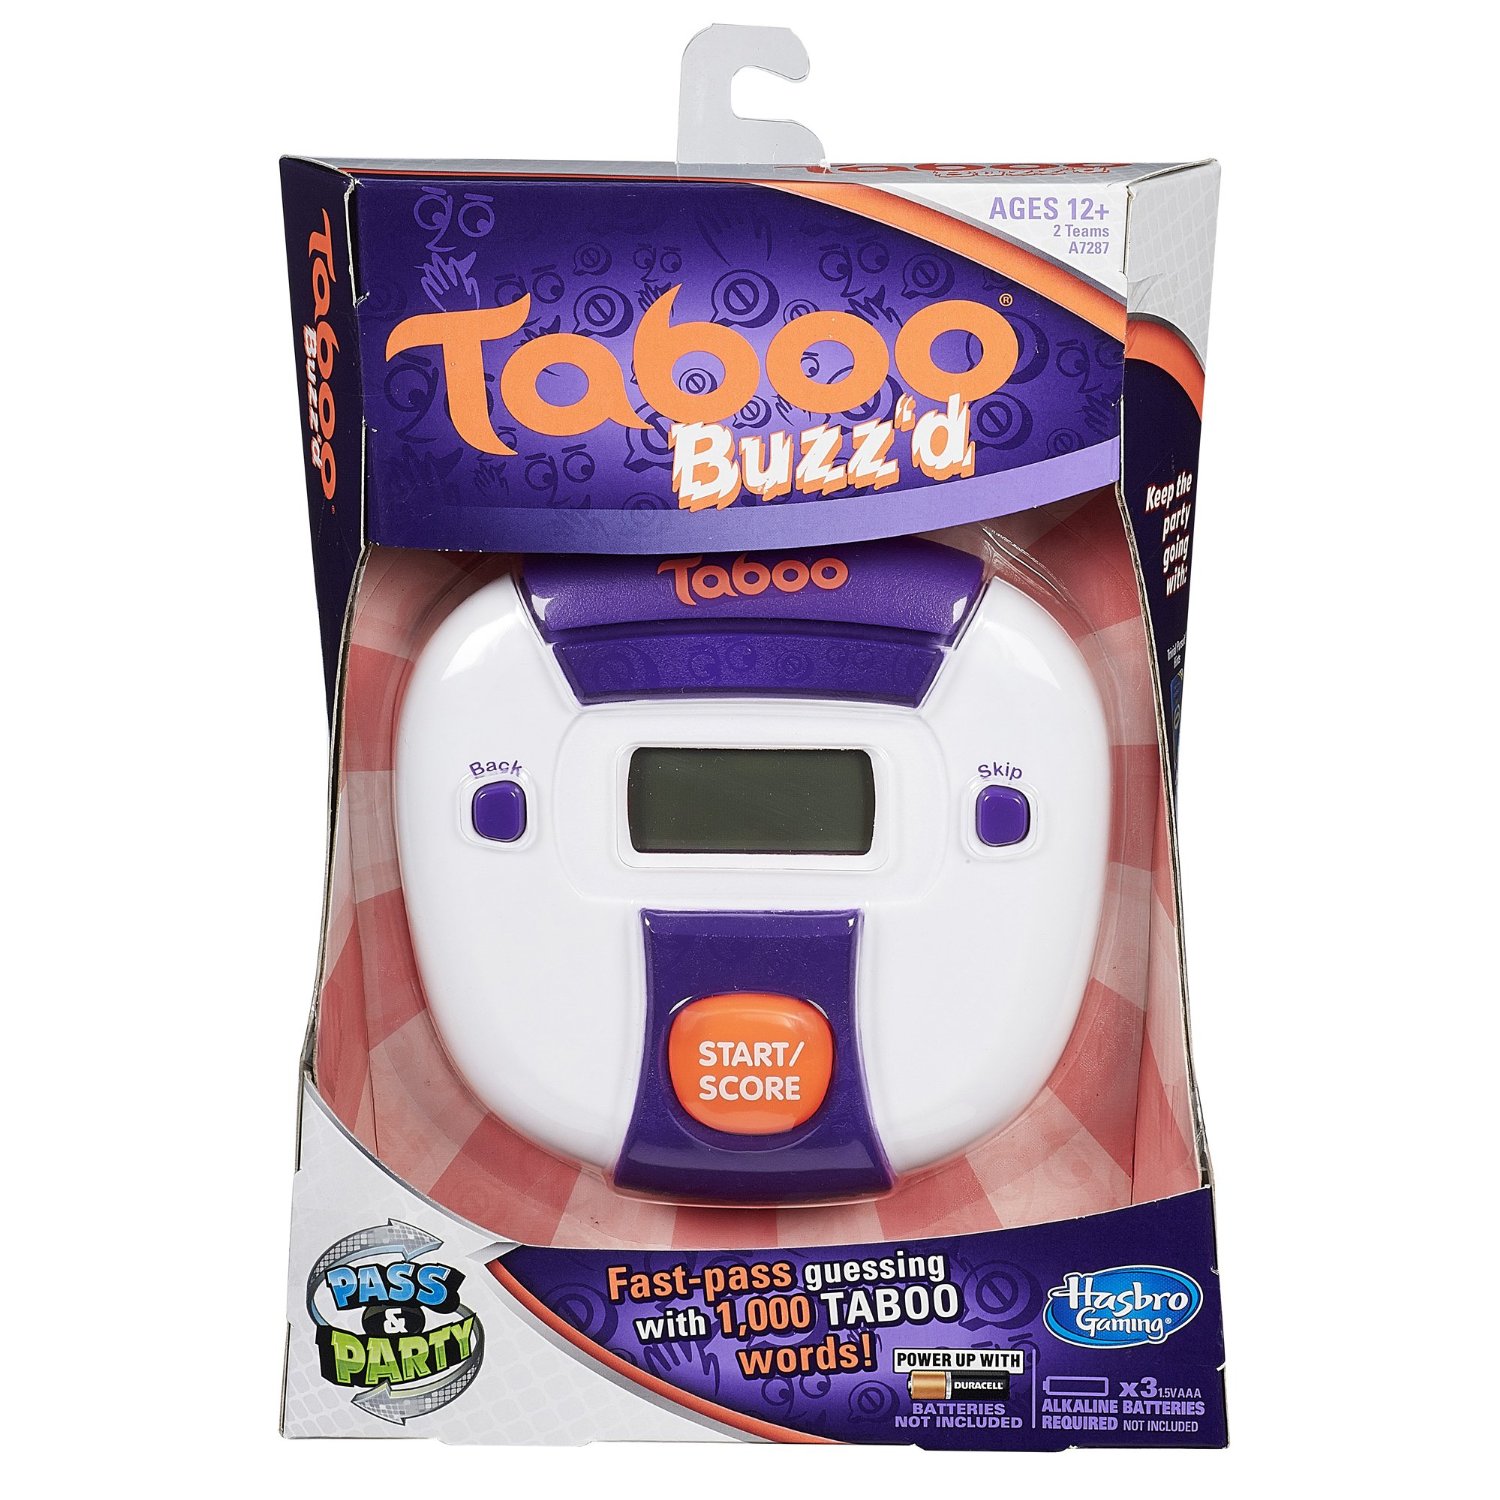 Taboo Buzzd Game – Just $3.98!